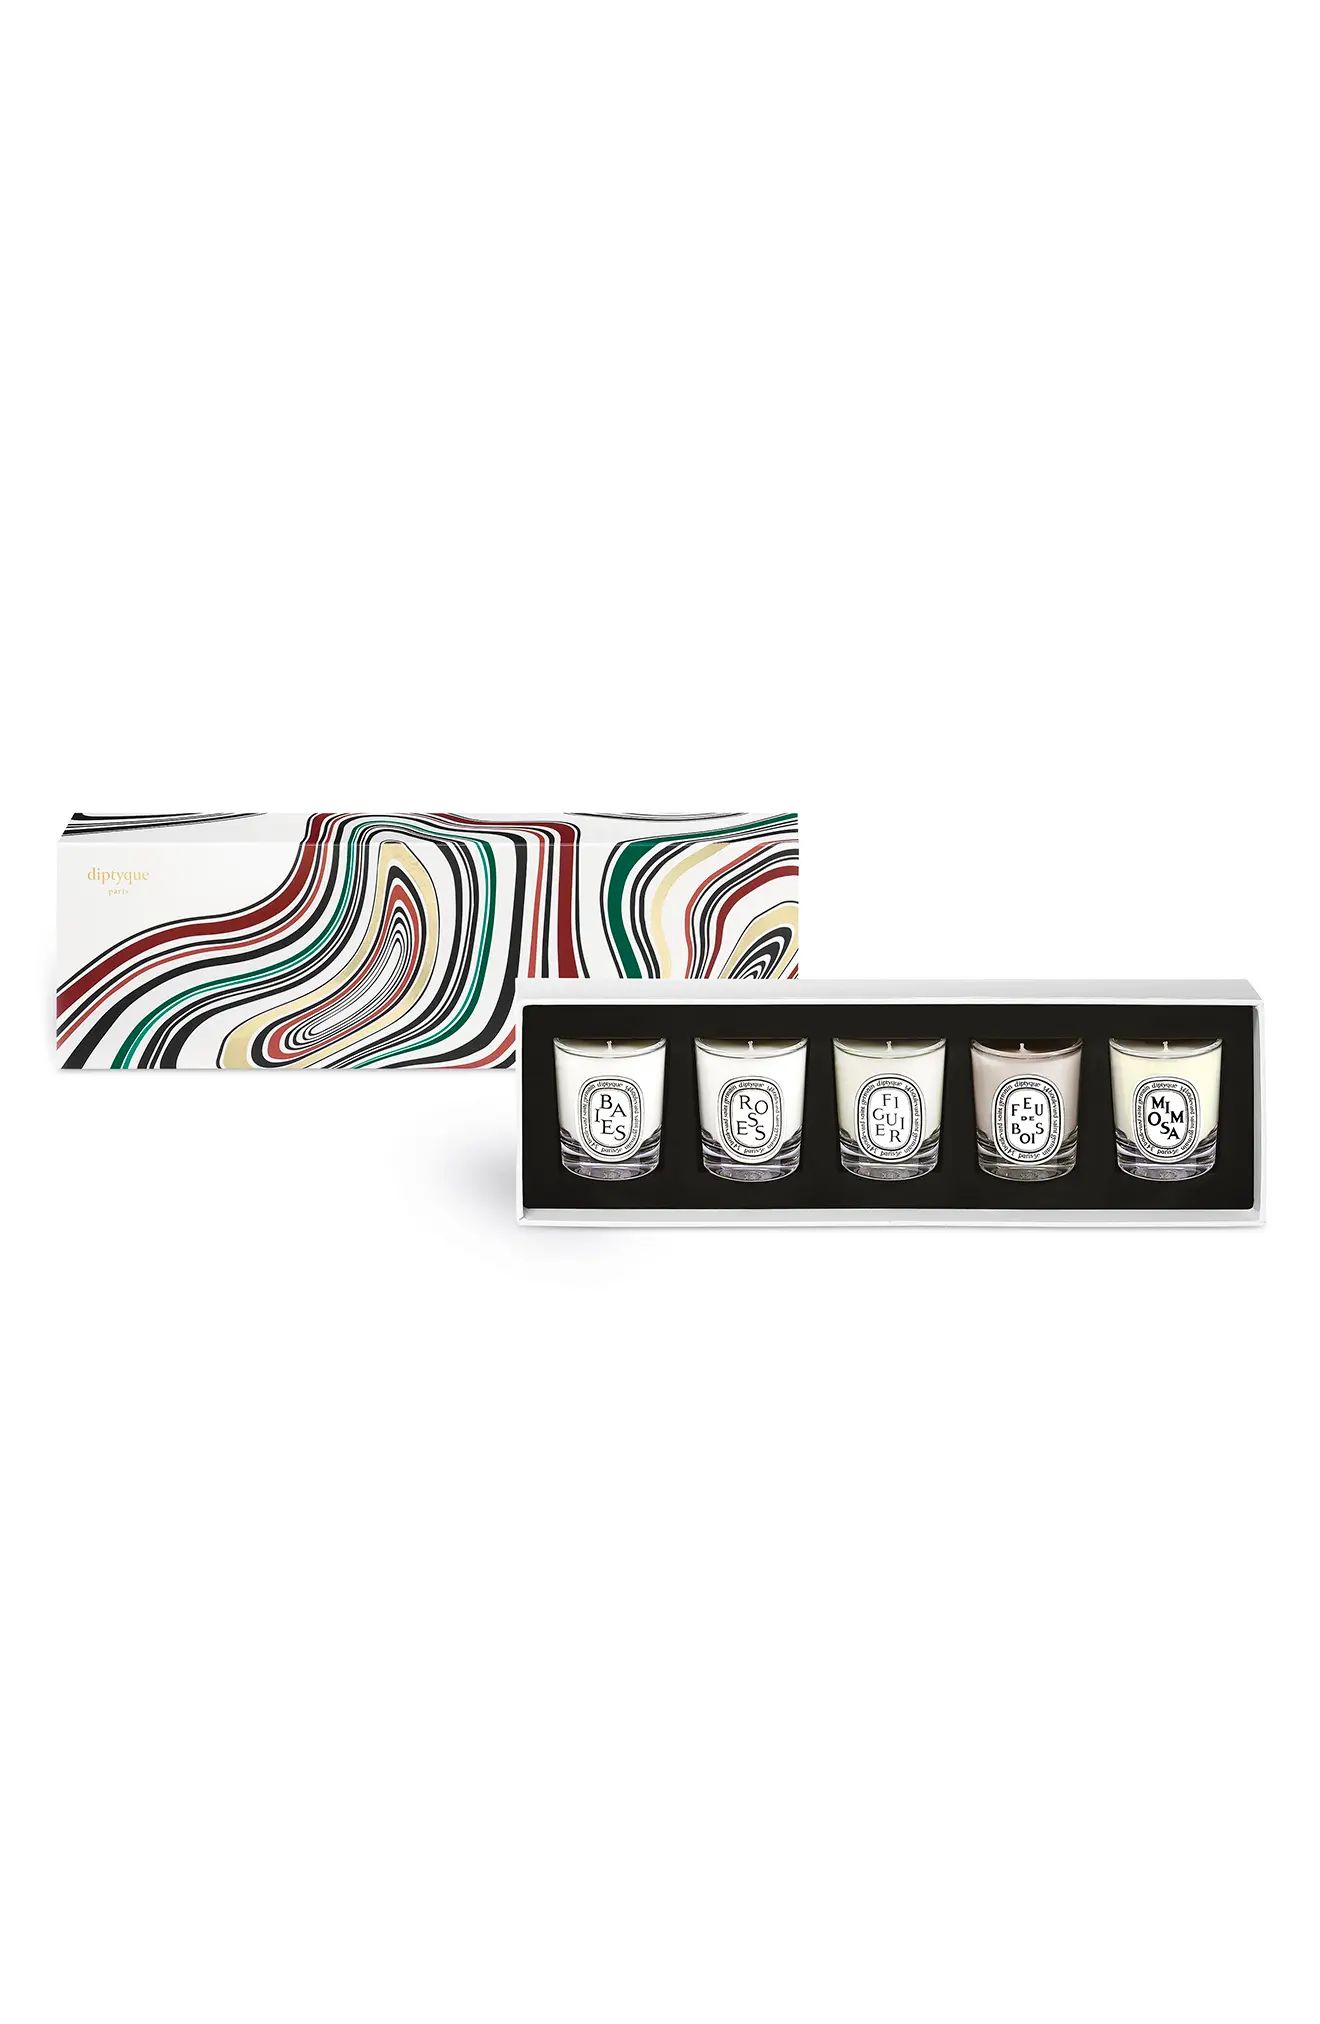 diptyque Miniature Candle Set USD $85 Value at Nordstrom | Nordstrom